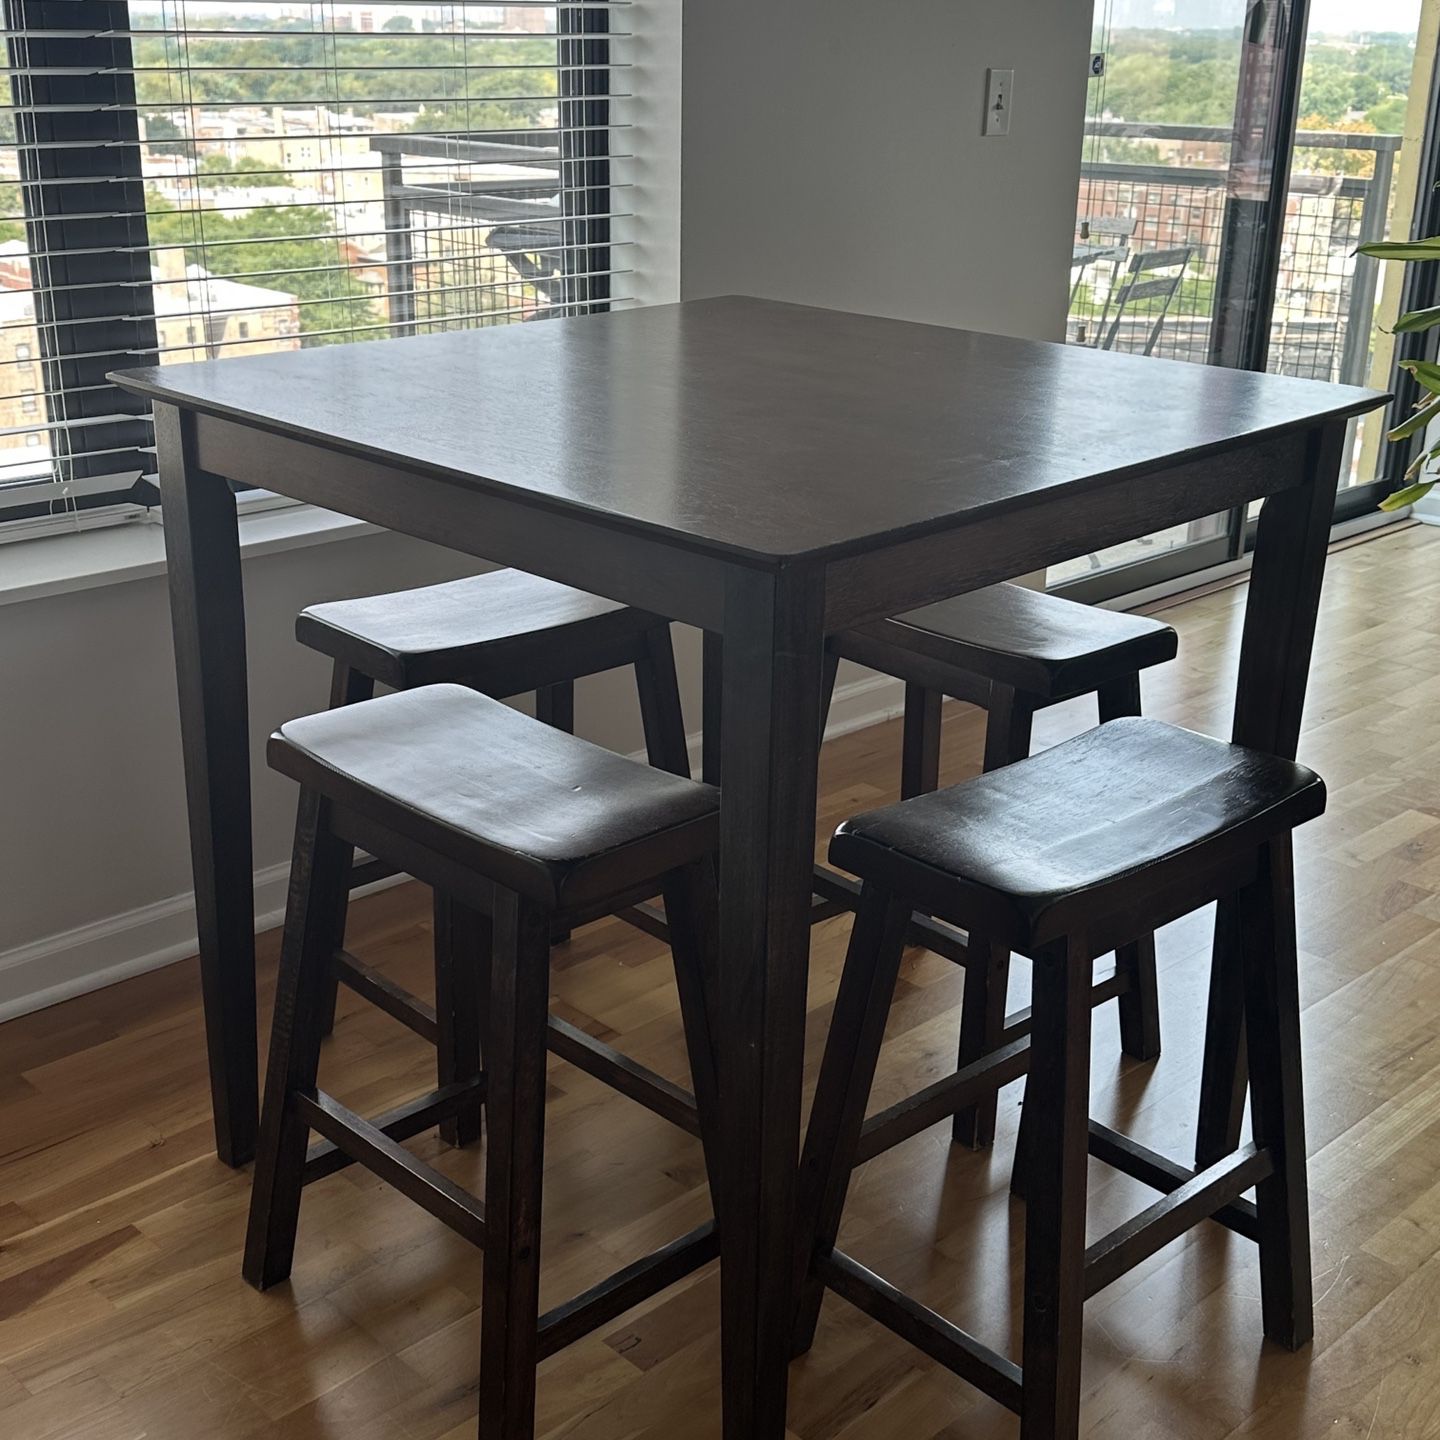 Dinning room Table With 4 Barstools